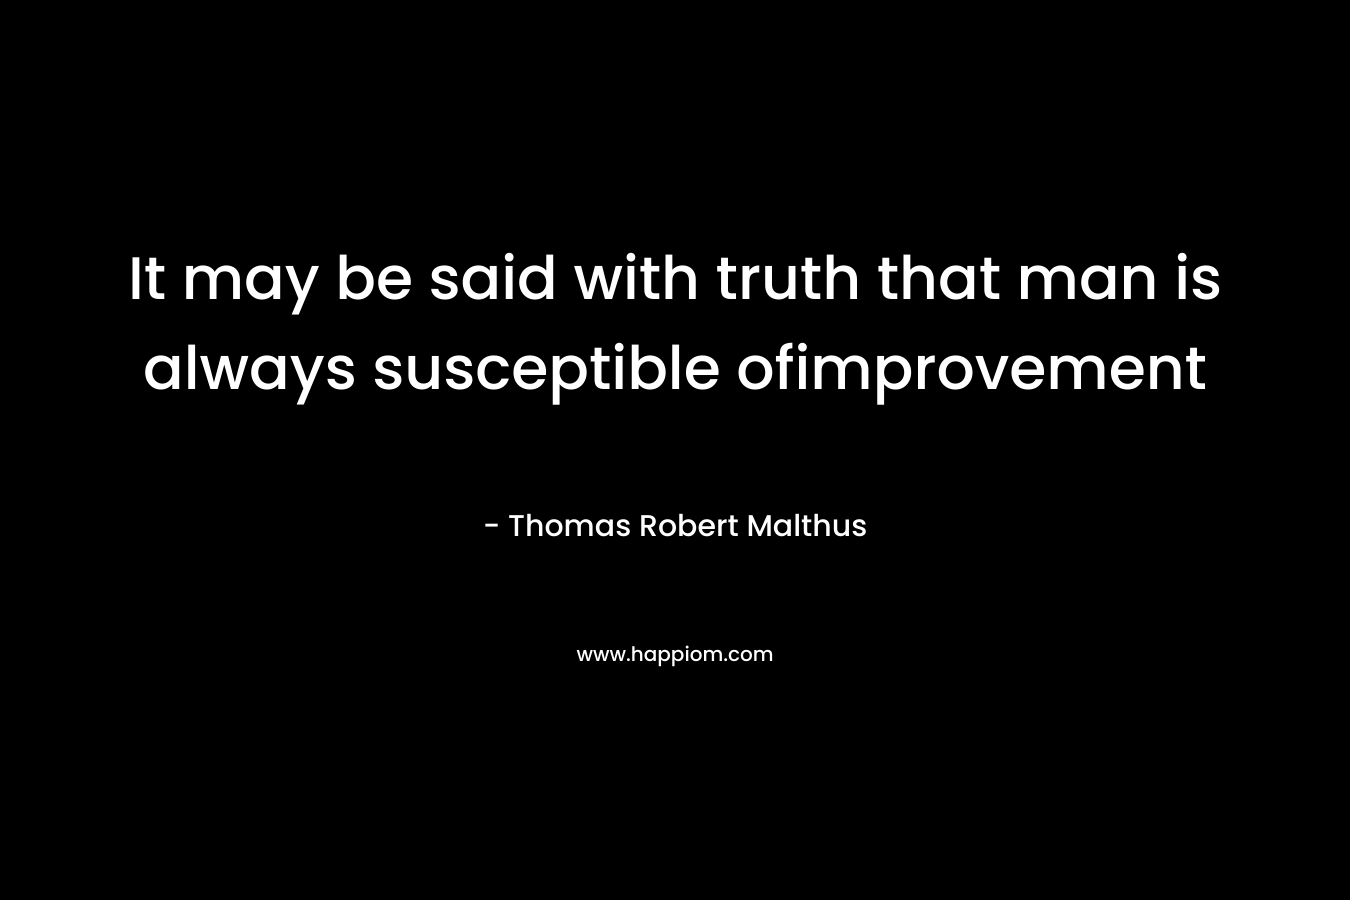 It may be said with truth that man is always susceptible ofimprovement – Thomas Robert Malthus